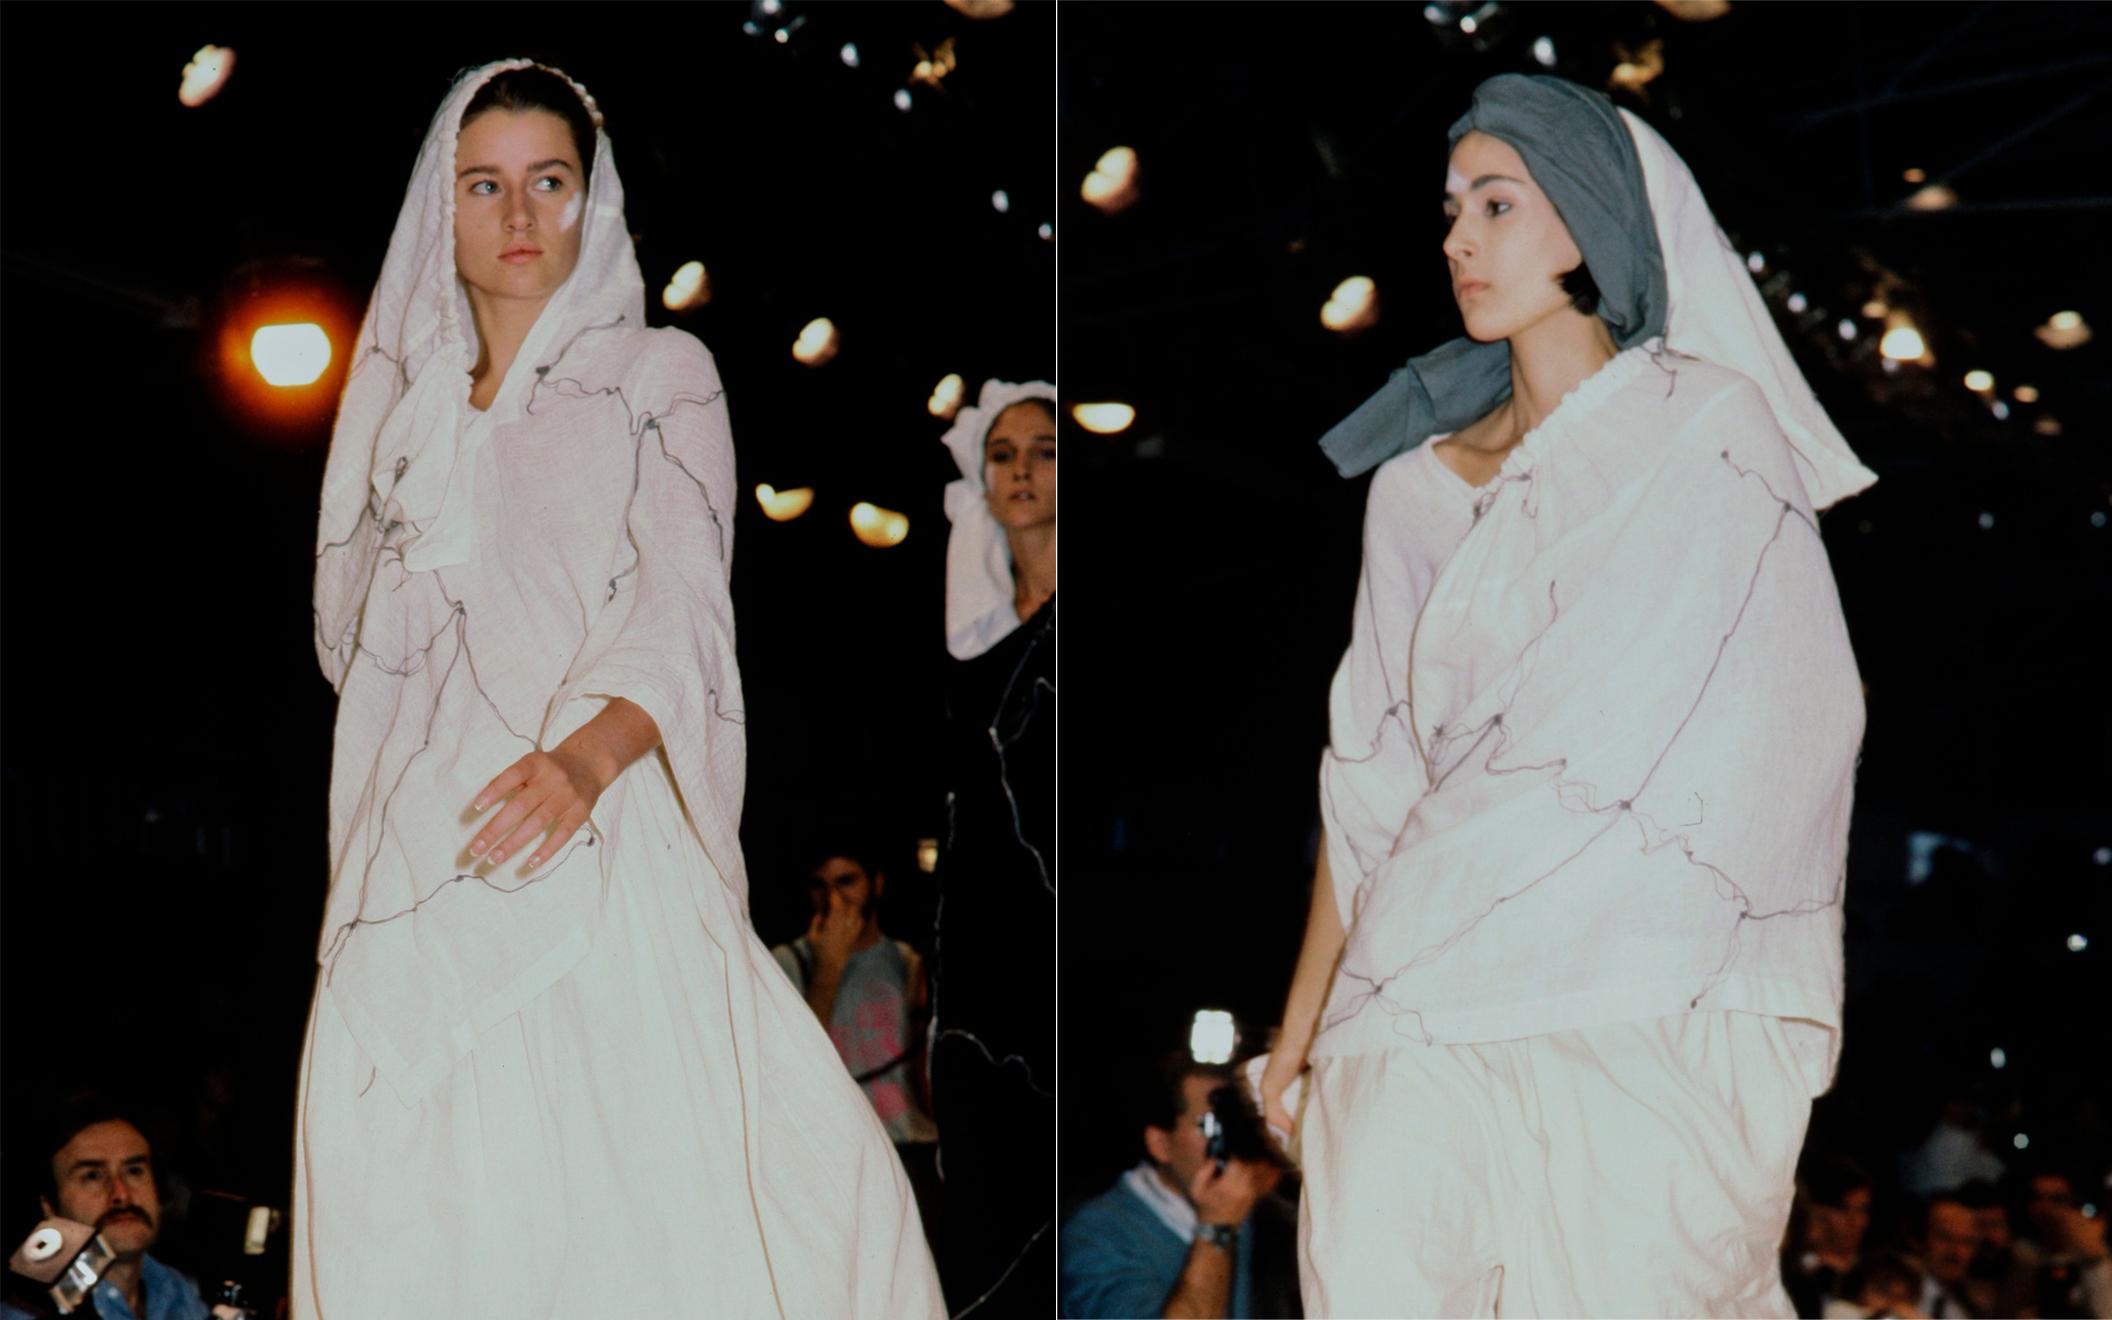 Comme des Garçons; Ivory muslin dress. Grey loosely stitched embroidery, large asymmetric drape on skirt, one armhole. Can be worn in various ways.

Spring-Summer 1984